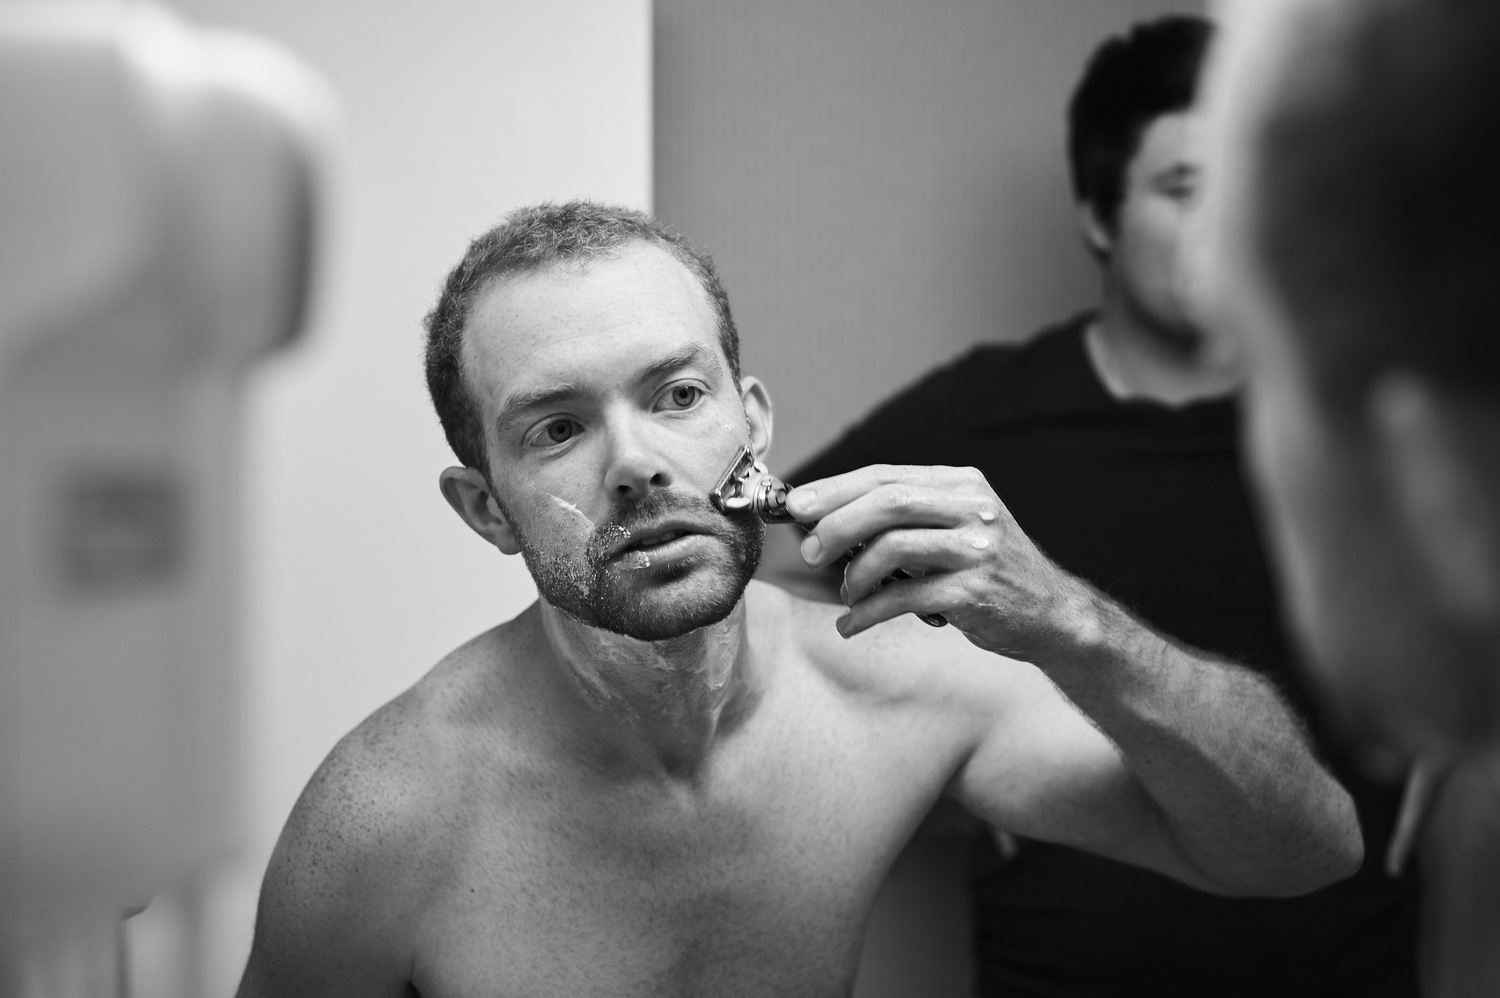 groom-shaving-and-getting-ready-black-and-white.jpg